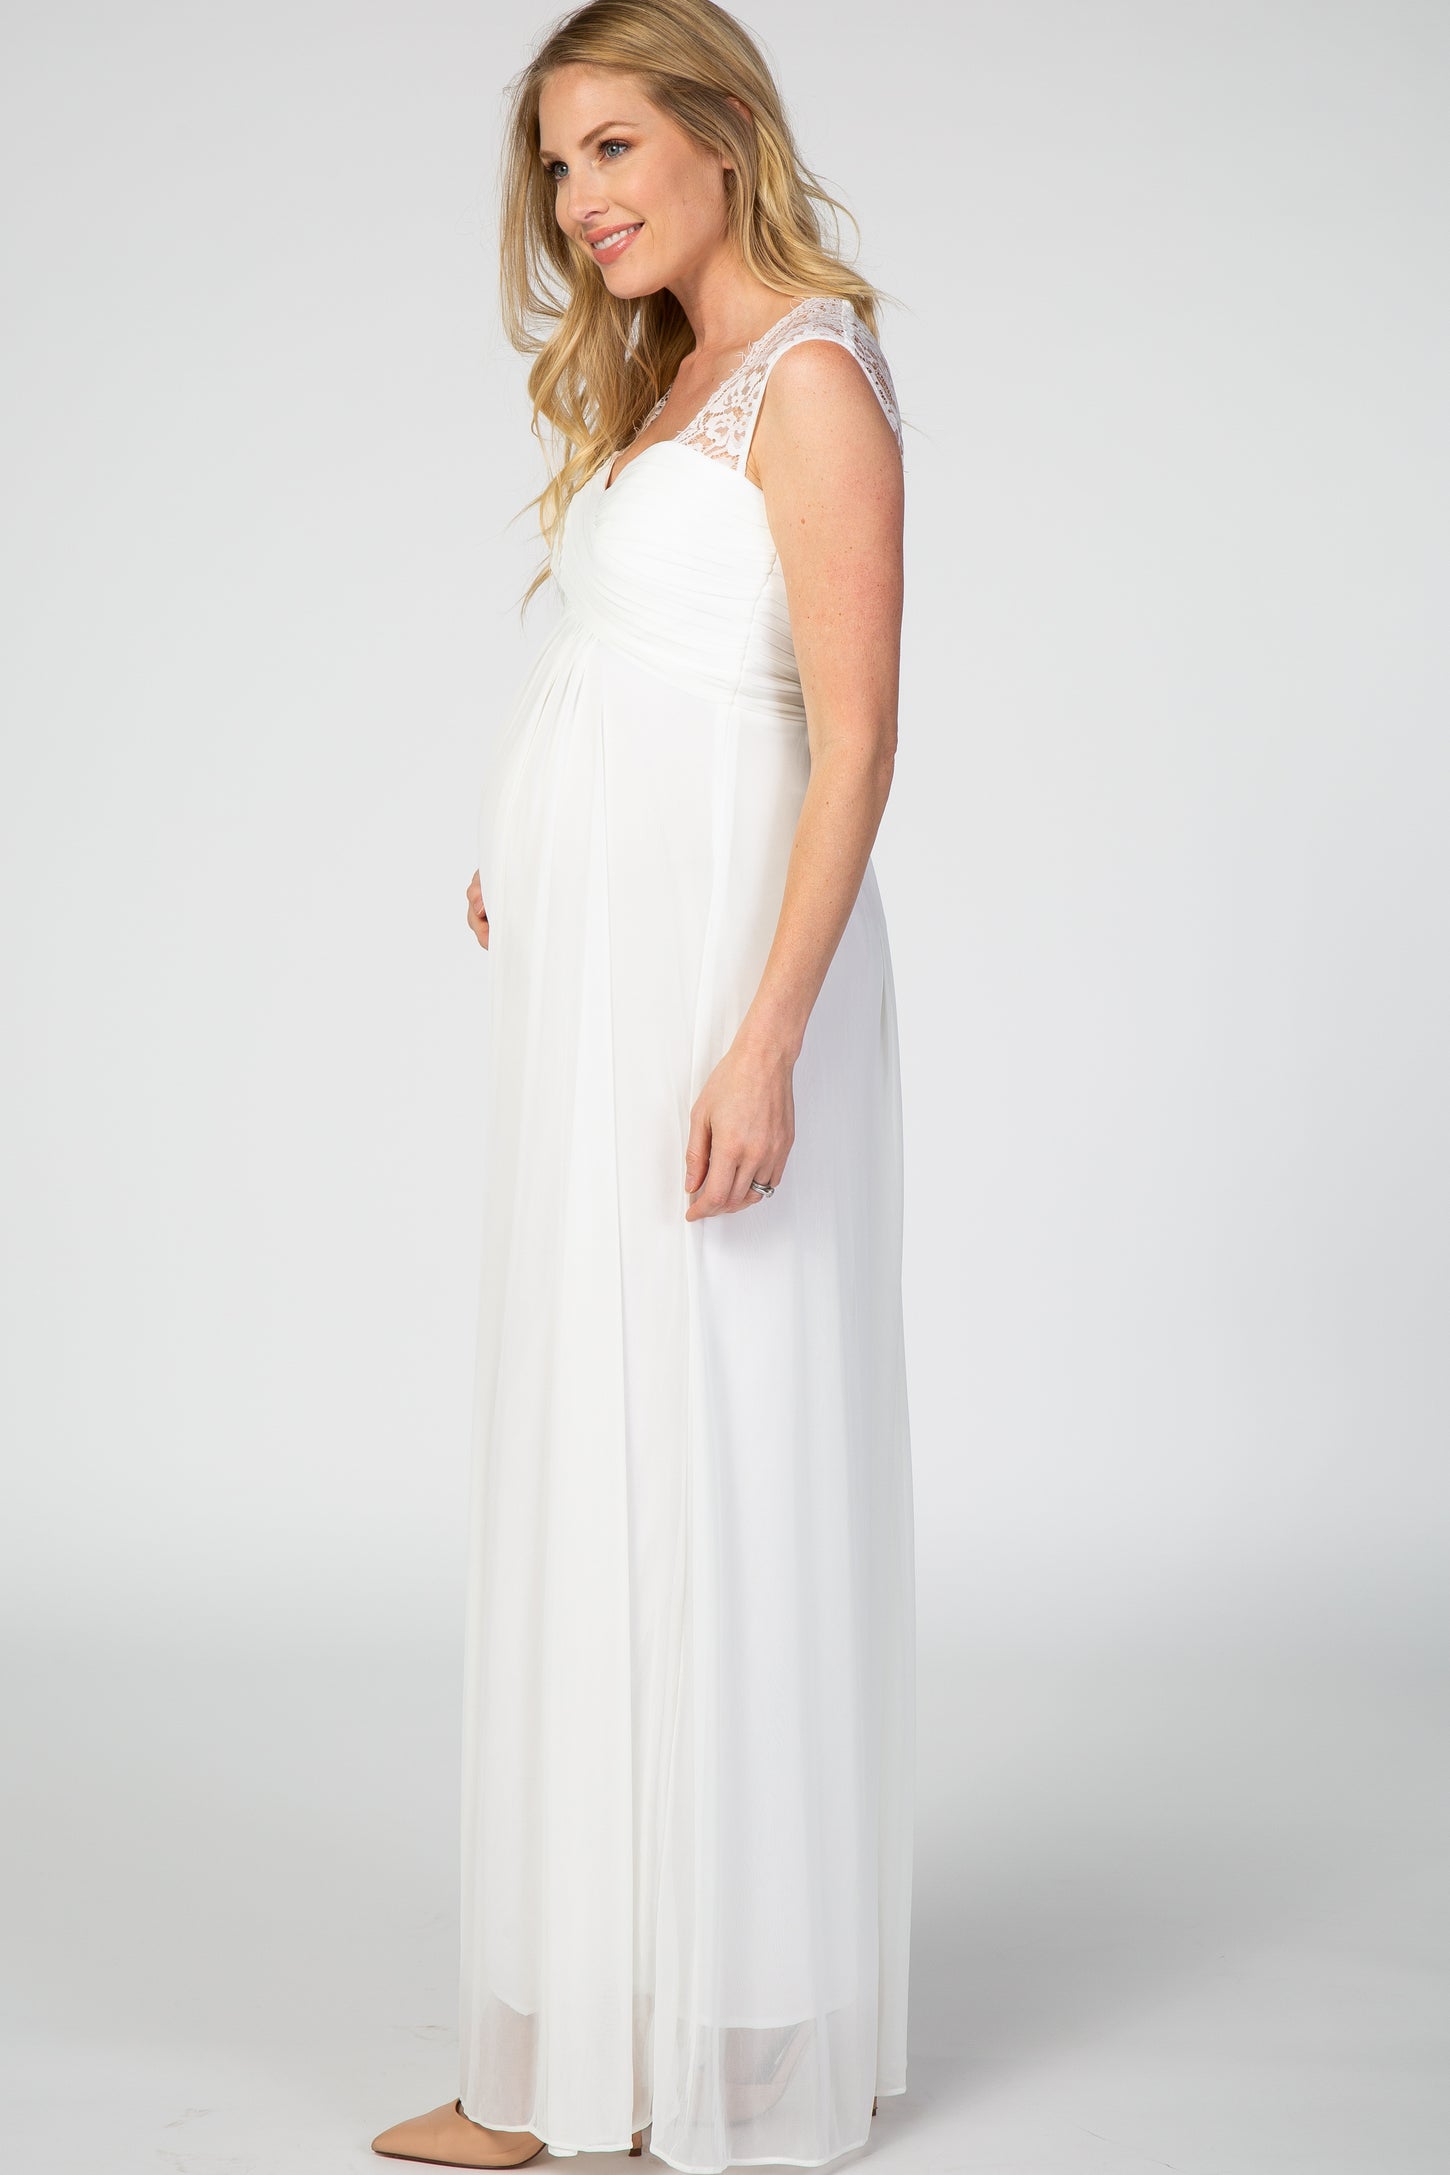 Ivory Lace Accent Chiffon Maternity Evening Gown